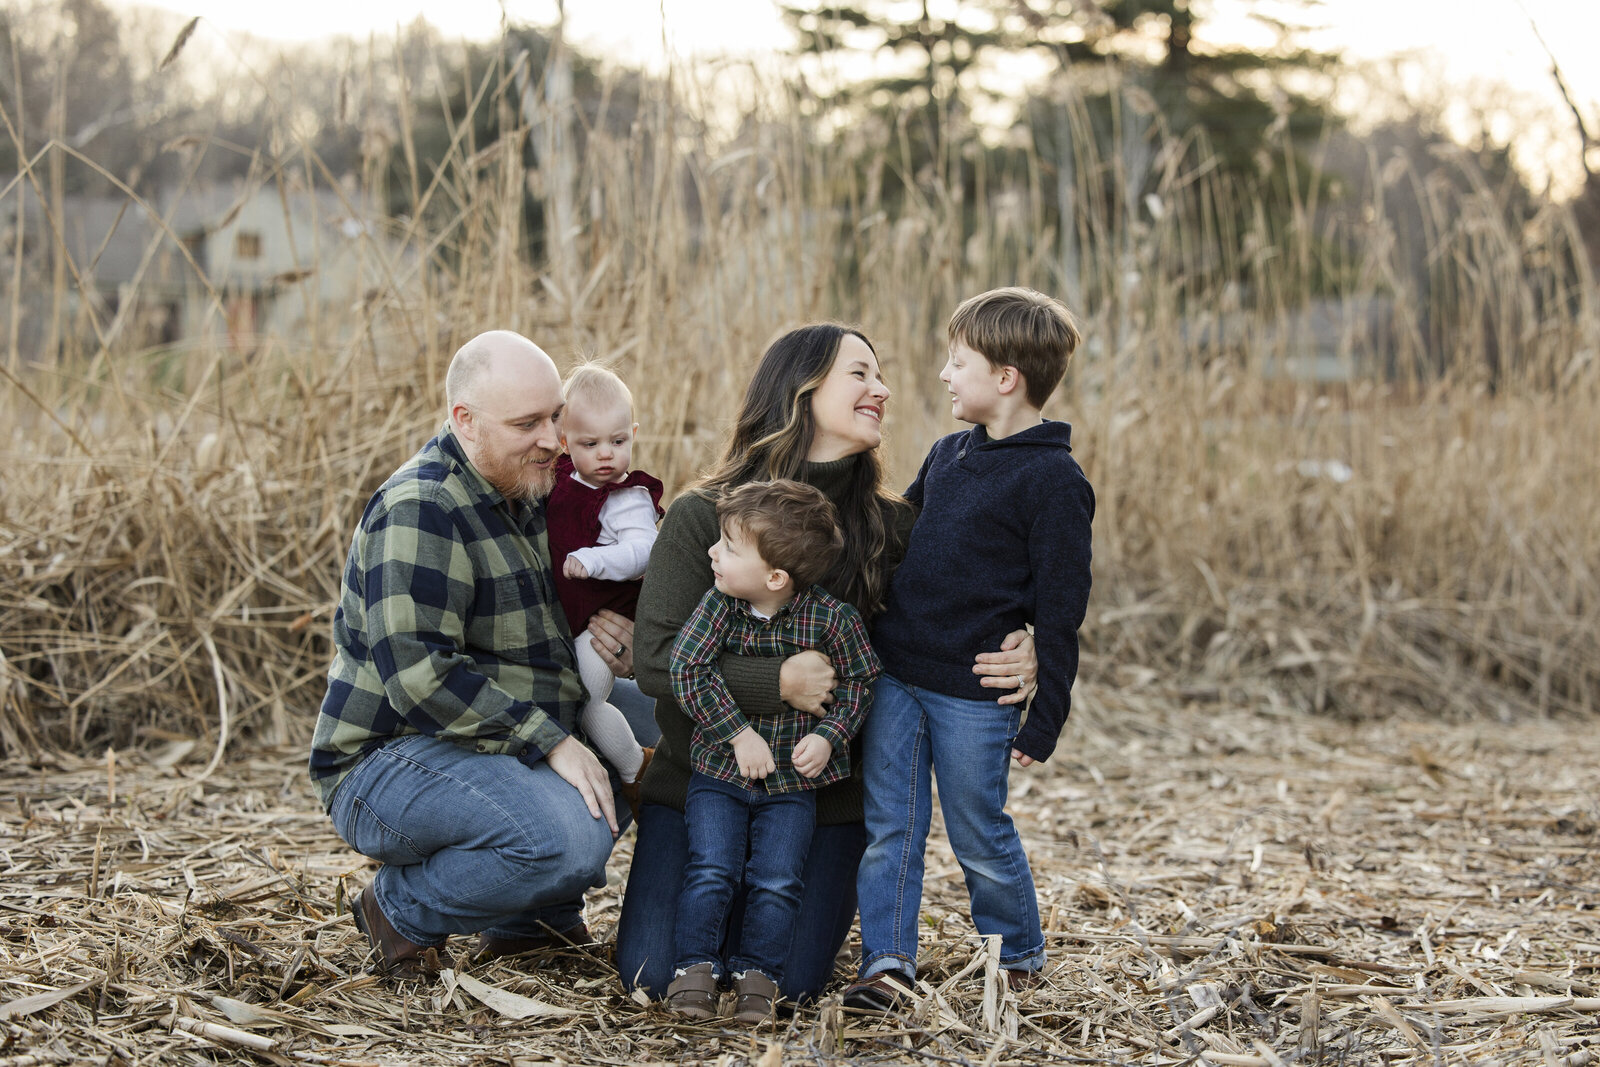 vermont-family-photography-new-england-family-portraits-6